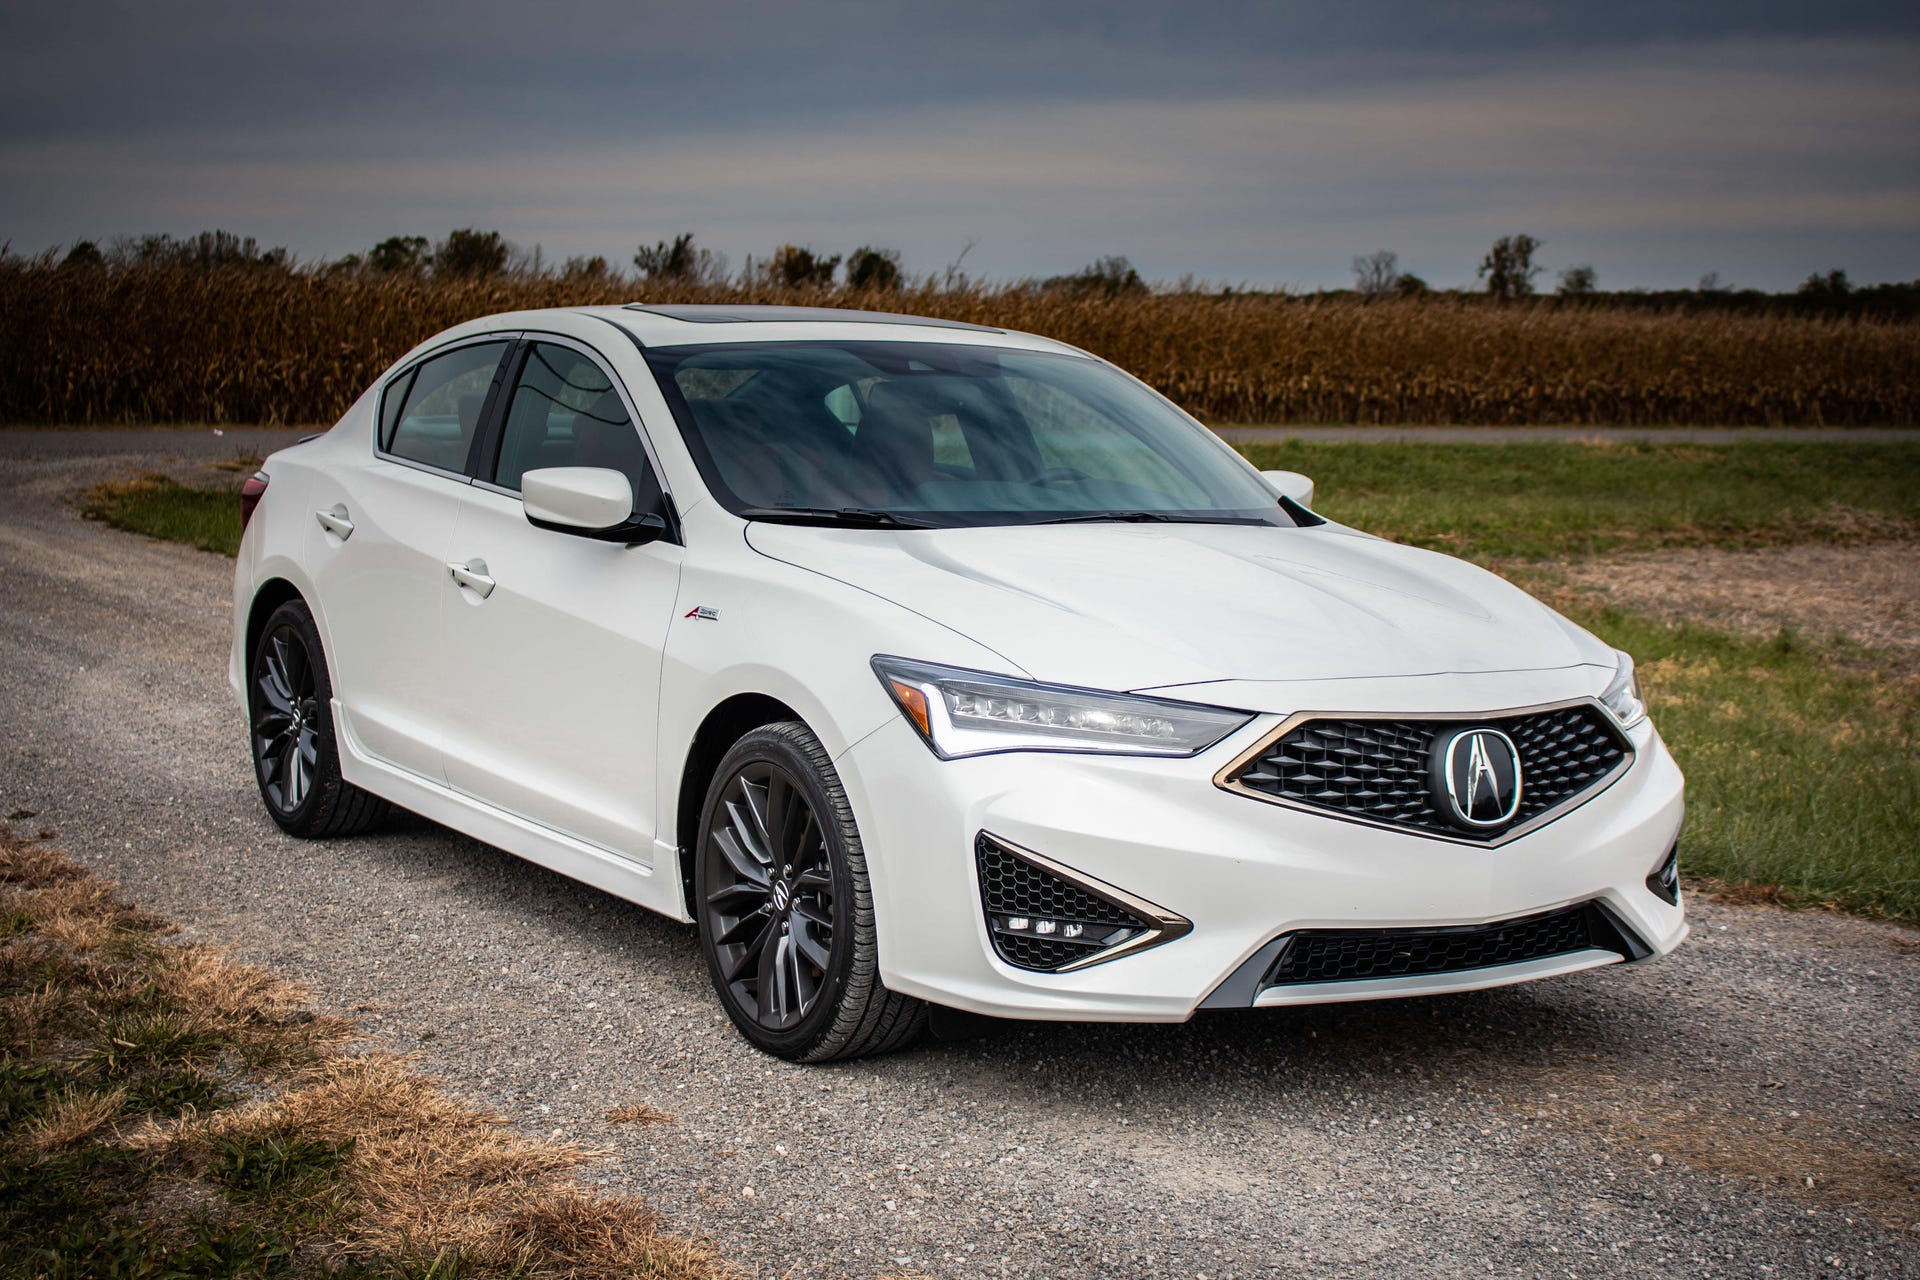 2019 Acura ILX review: 2019 Acura ILX first drive review: Same car, better  value - CNET